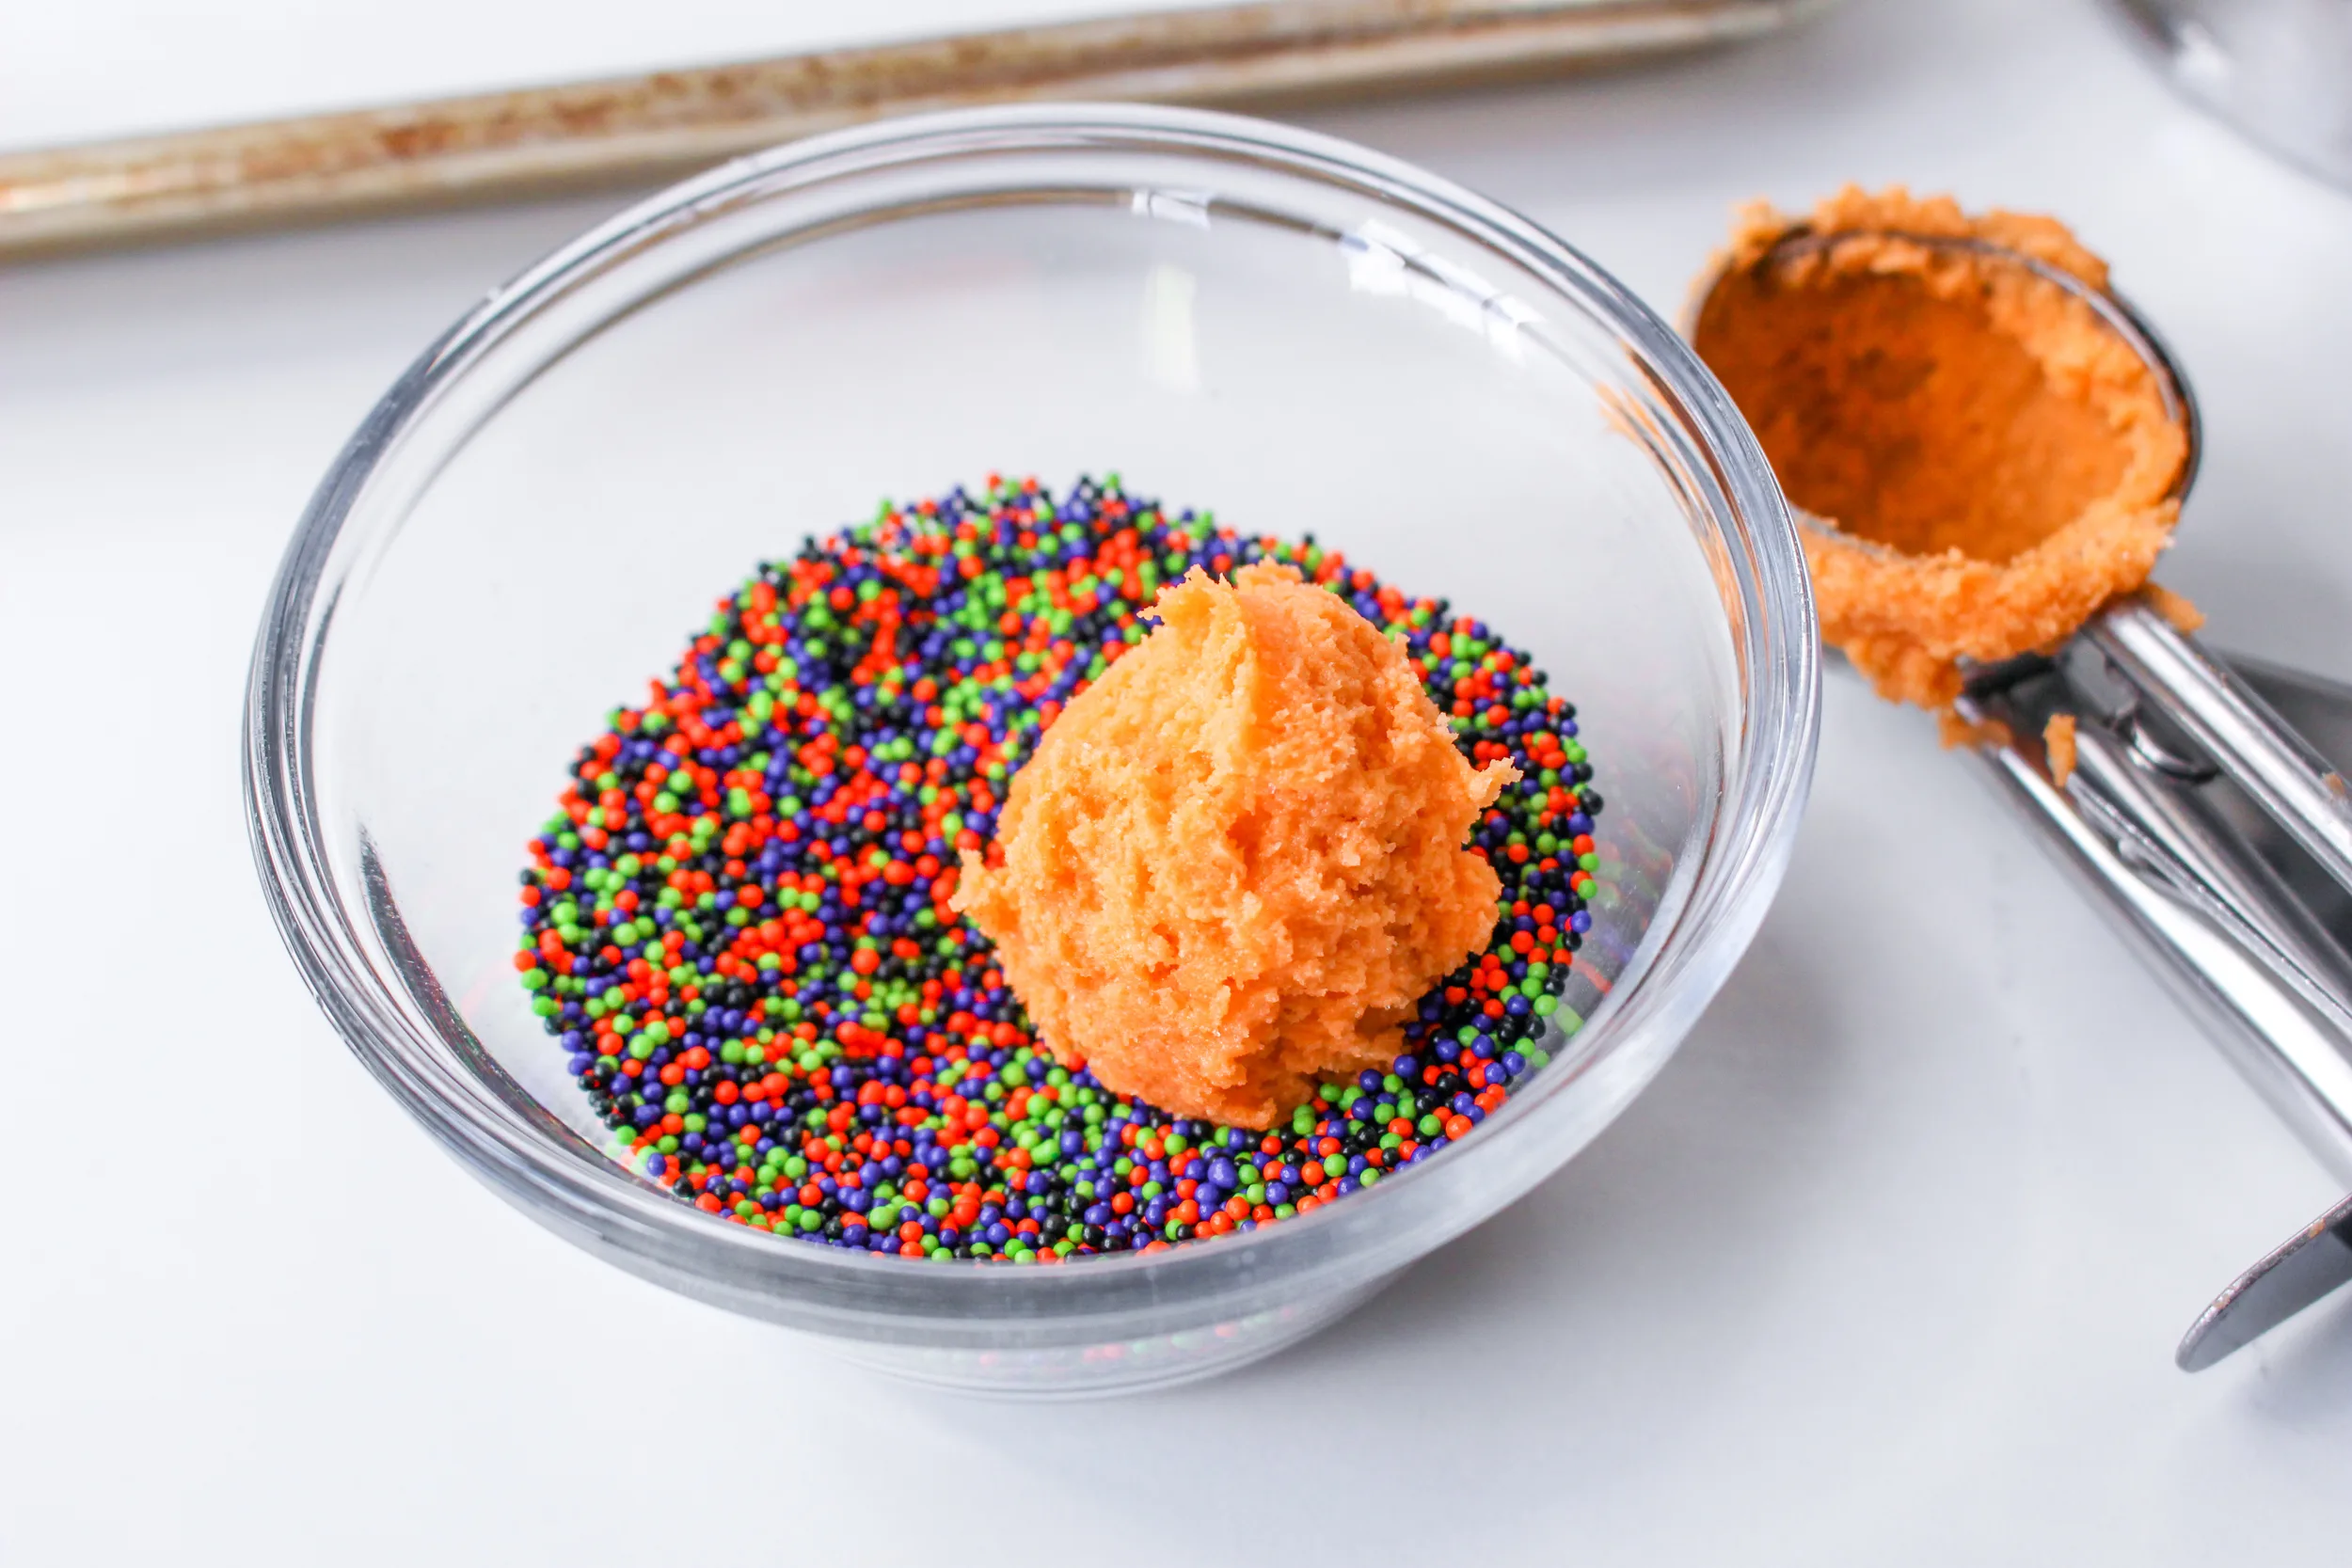 A ball of halloween blossom cookie batter sitting in a bowl of sprinkles